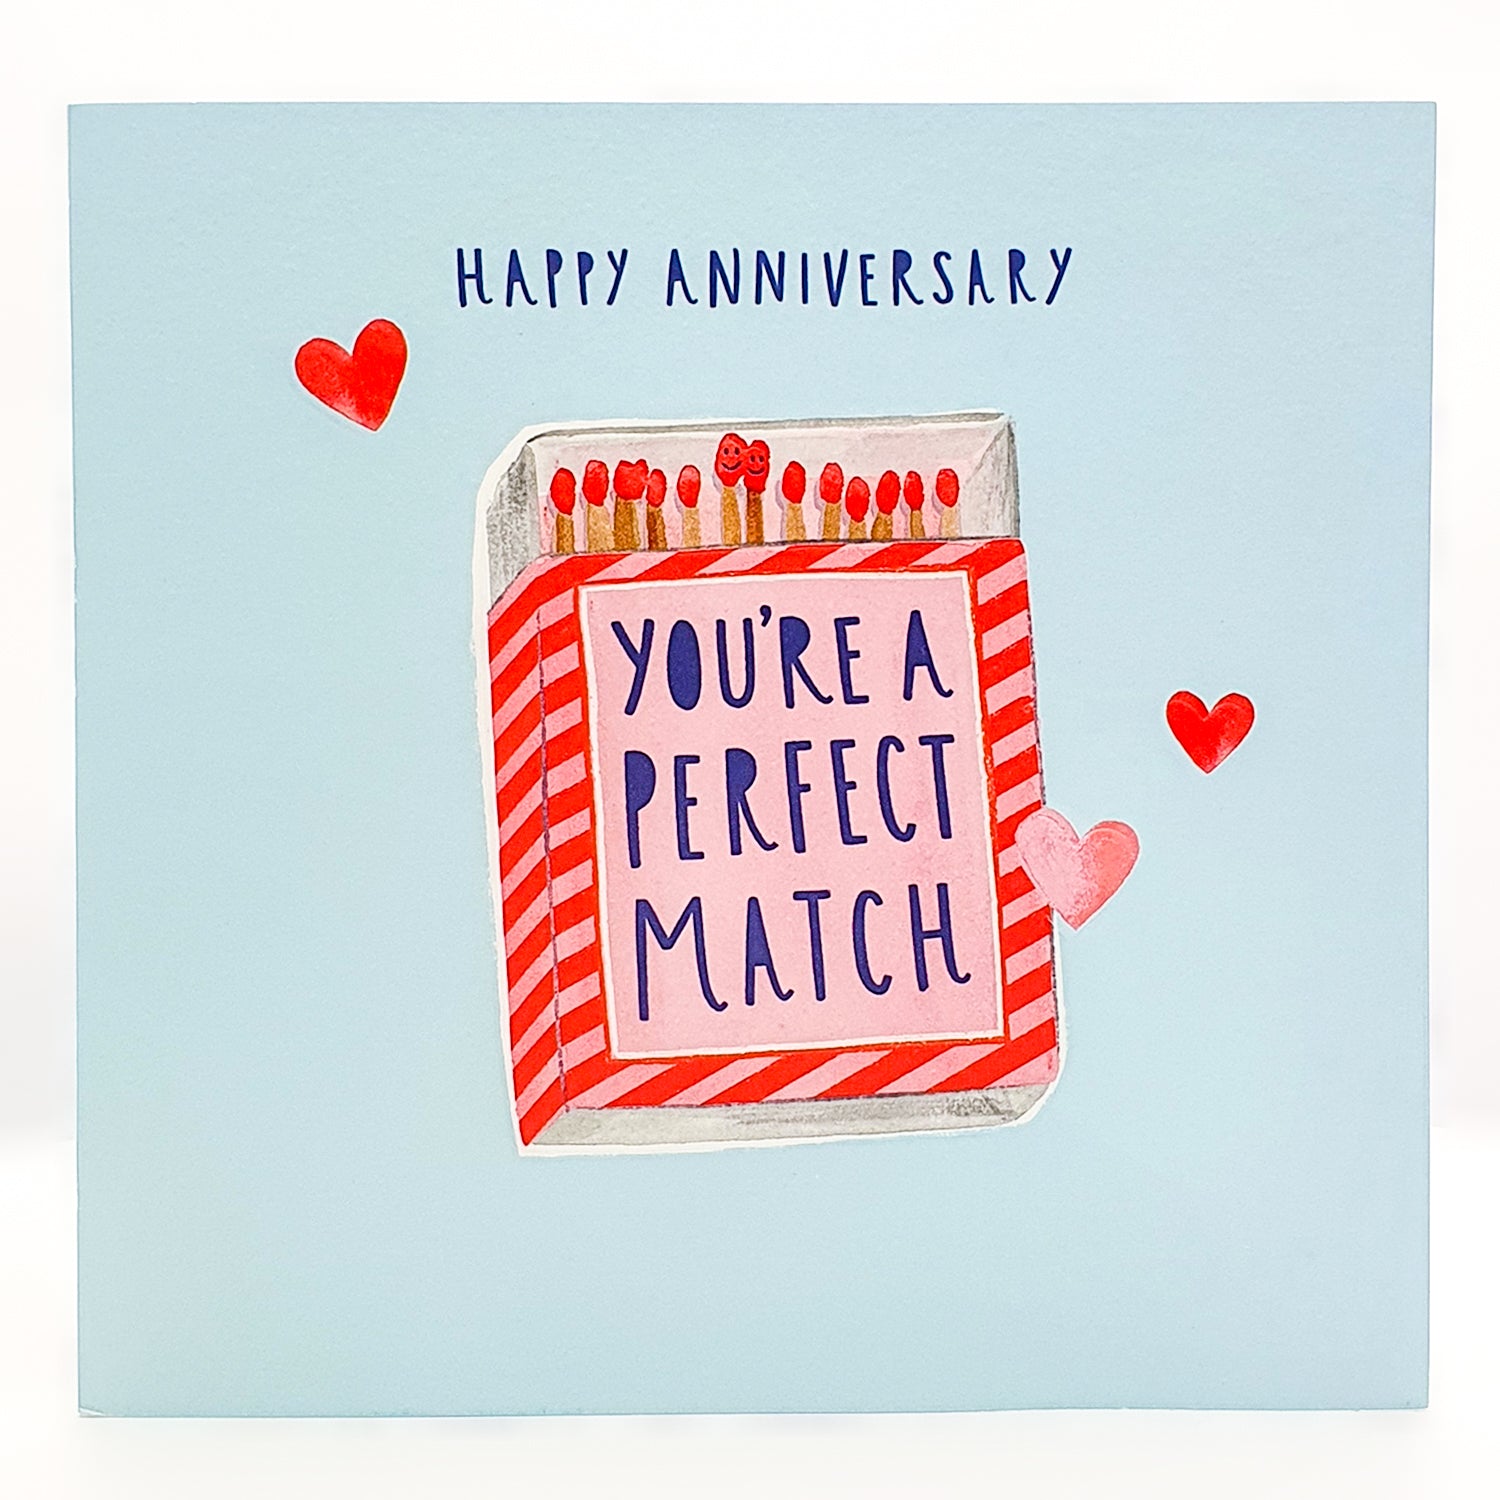 Happy Anniversary Card - Perfect Match